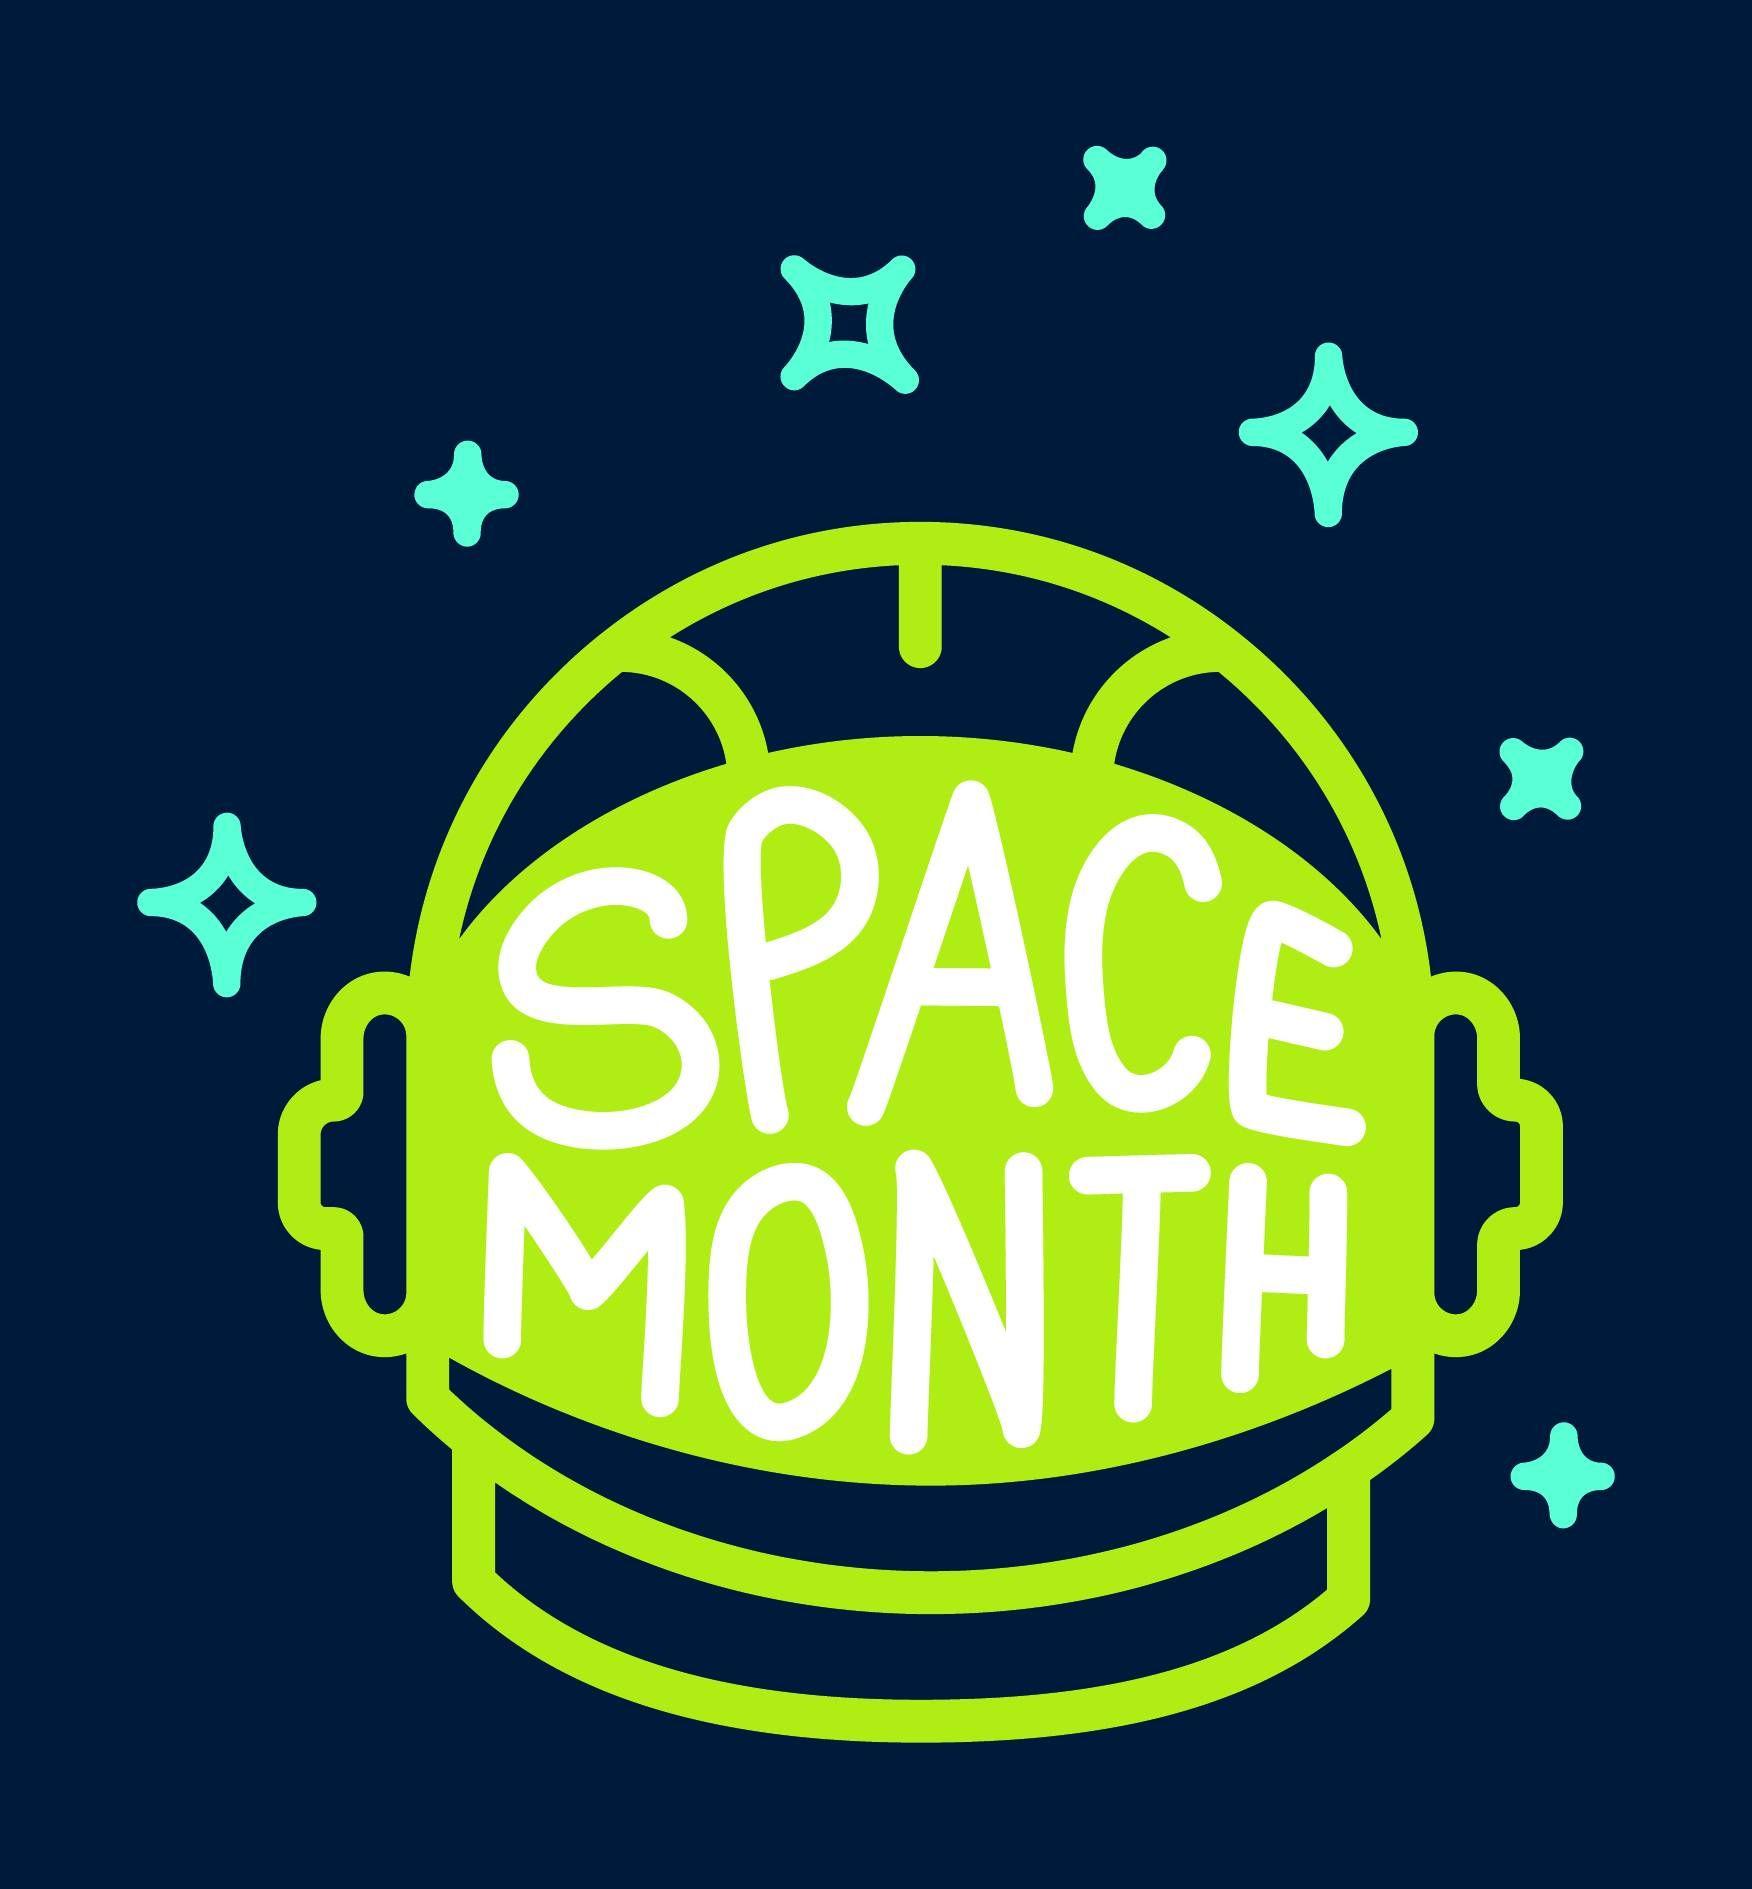 Anythink Logo - March is Space Month at Anythink